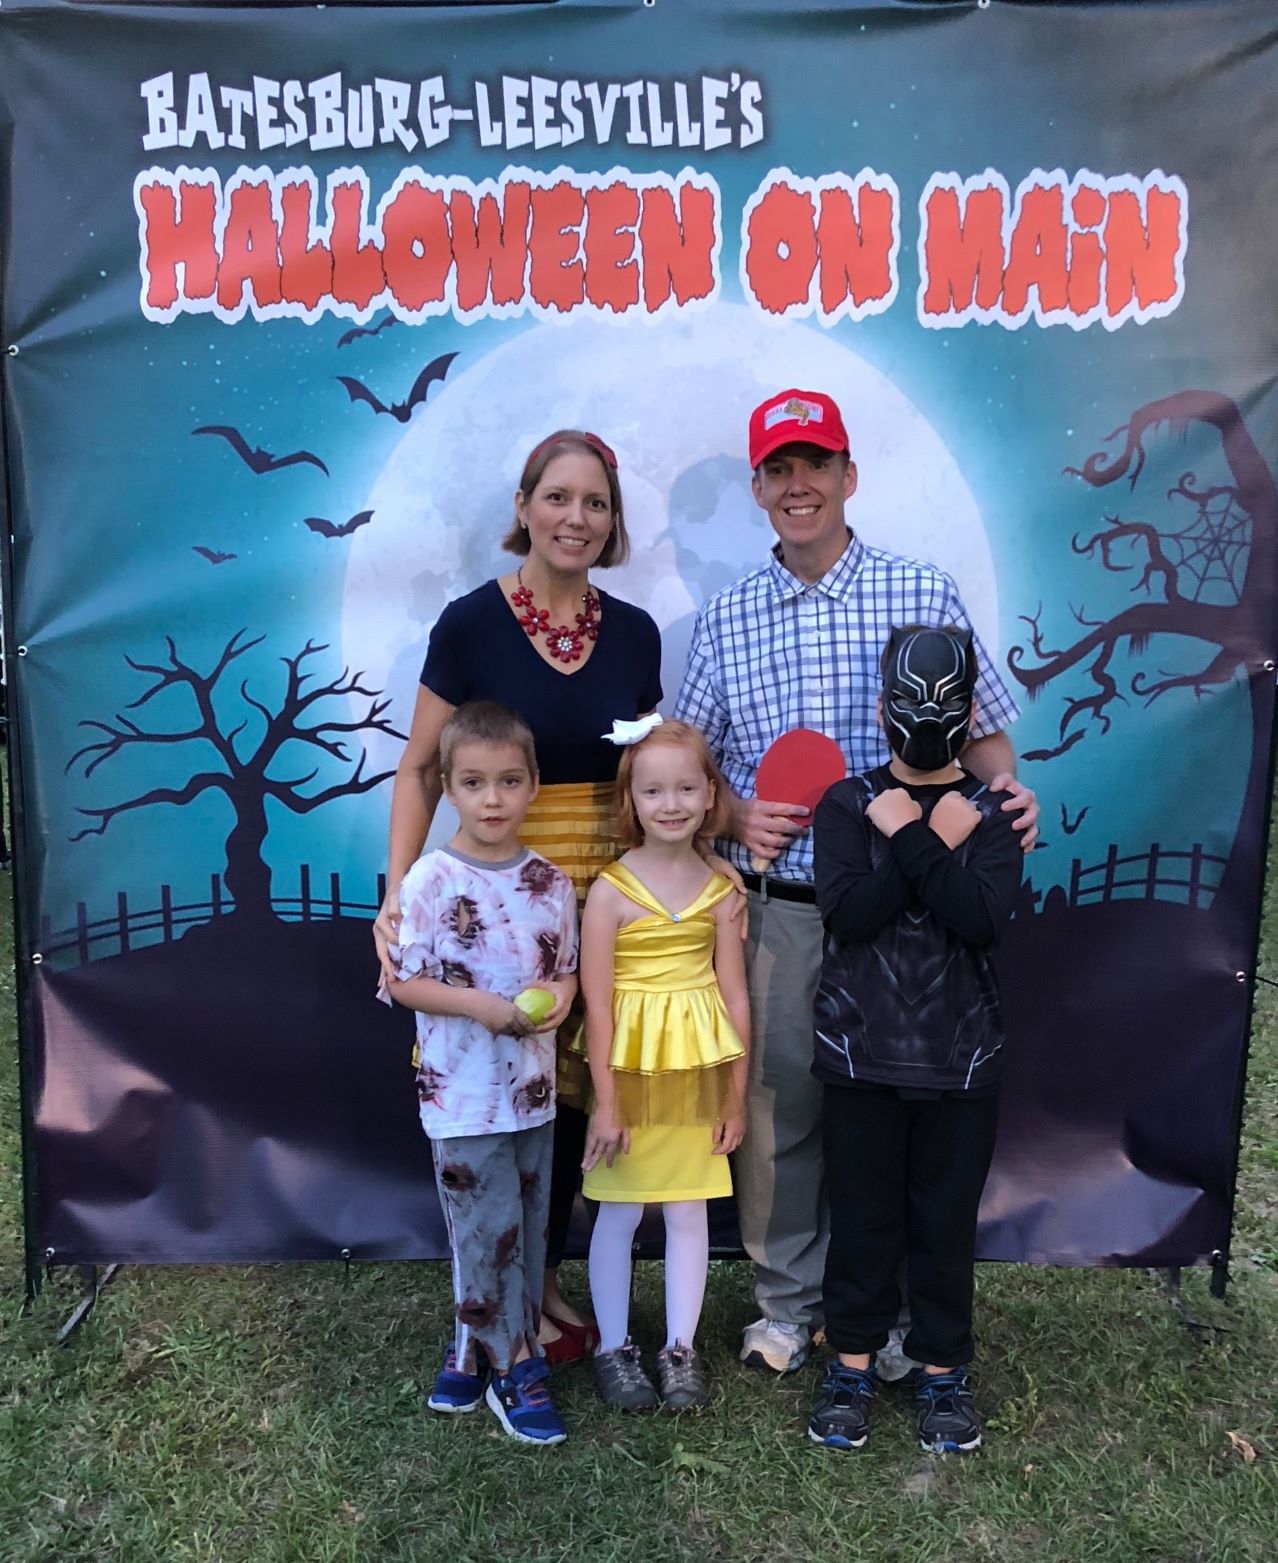 Batesburg-Leesville Assistant Town Manager Seth Duncan posing with family at the town's Halloween celebration